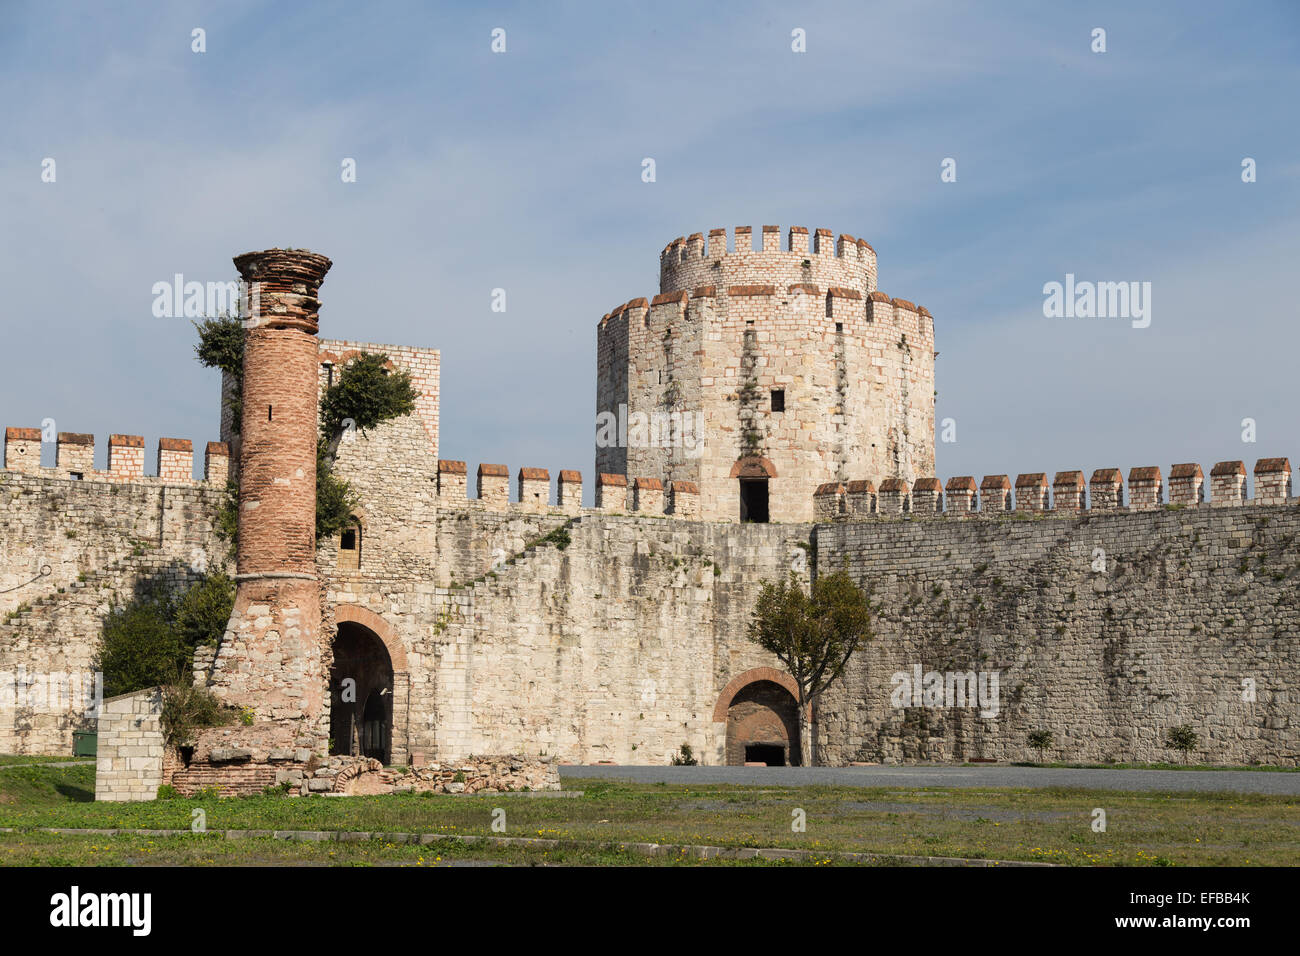 CONTENT] Yedikule Fortress , meaning Fortress of the Seven Towers is  News Photo - Getty Images